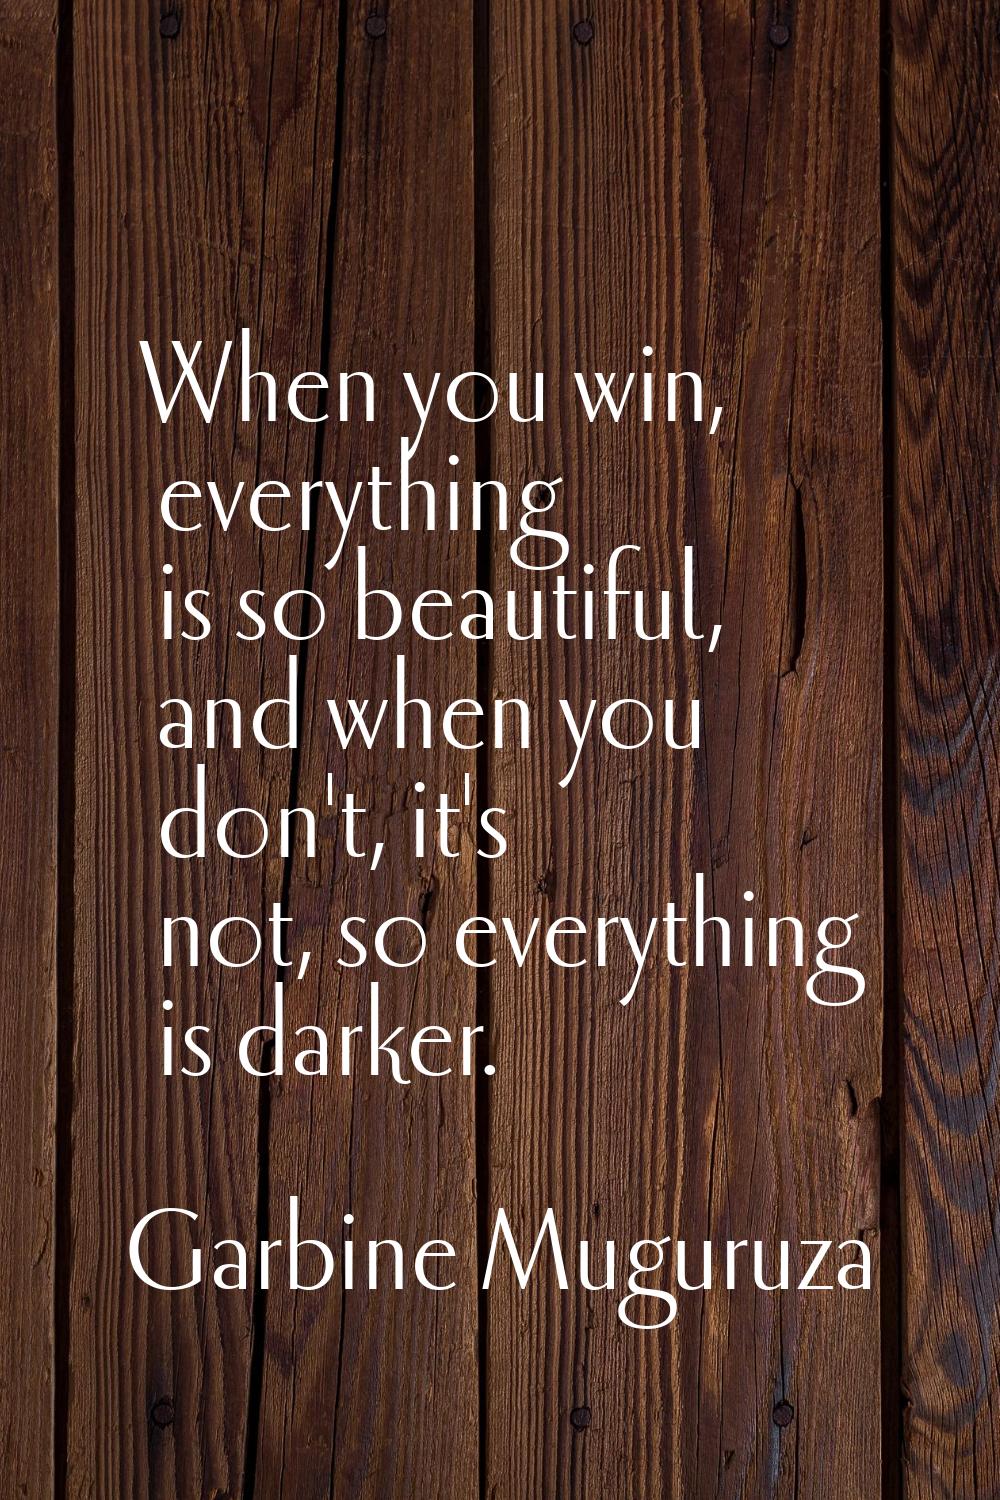 When you win, everything is so beautiful, and when you don't, it's not, so everything is darker.